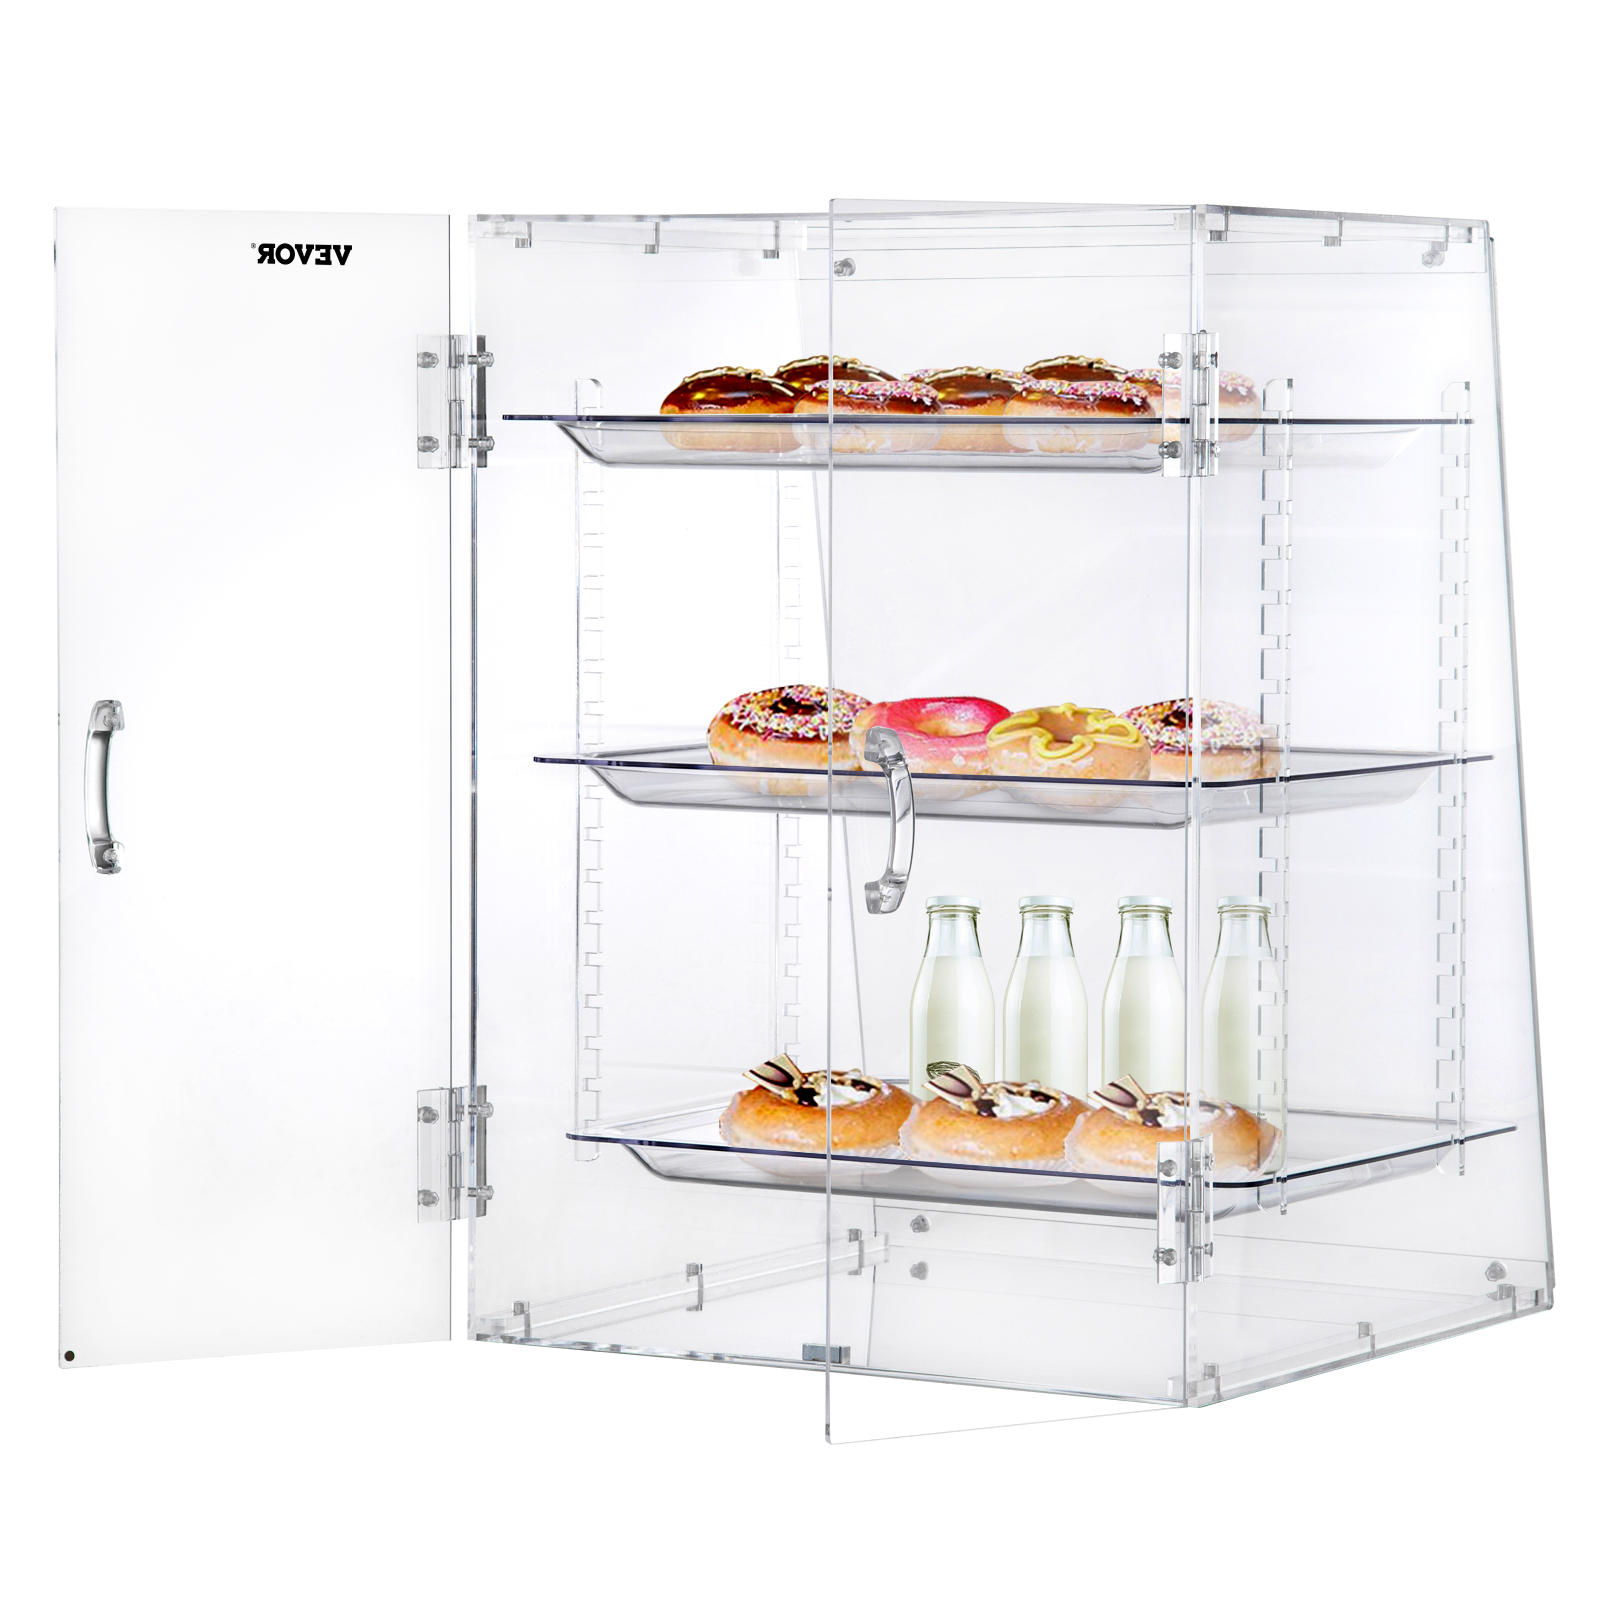 Clear Acrylic Square Cake Separator Display Boxes from £45.00